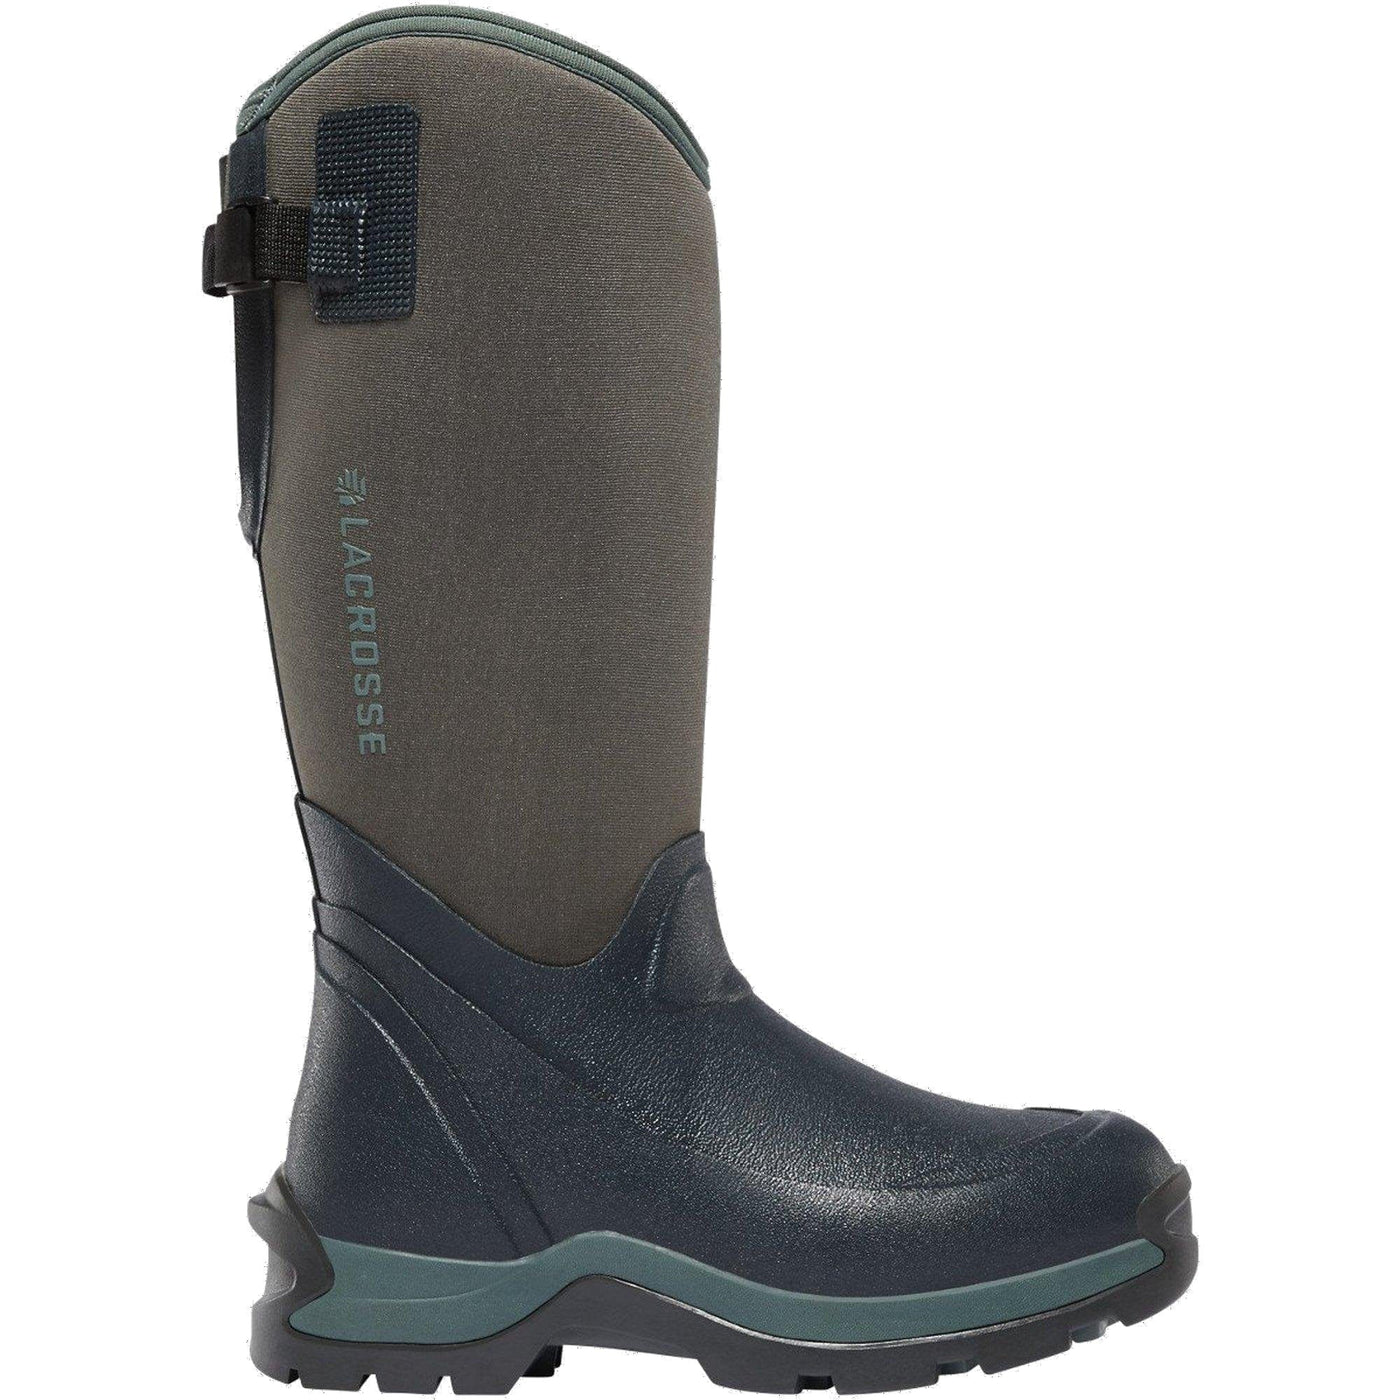 Lacrosse-Womens-Alpha-Thermal-14-7.0MM-gray-balsam-green-insulated-boots